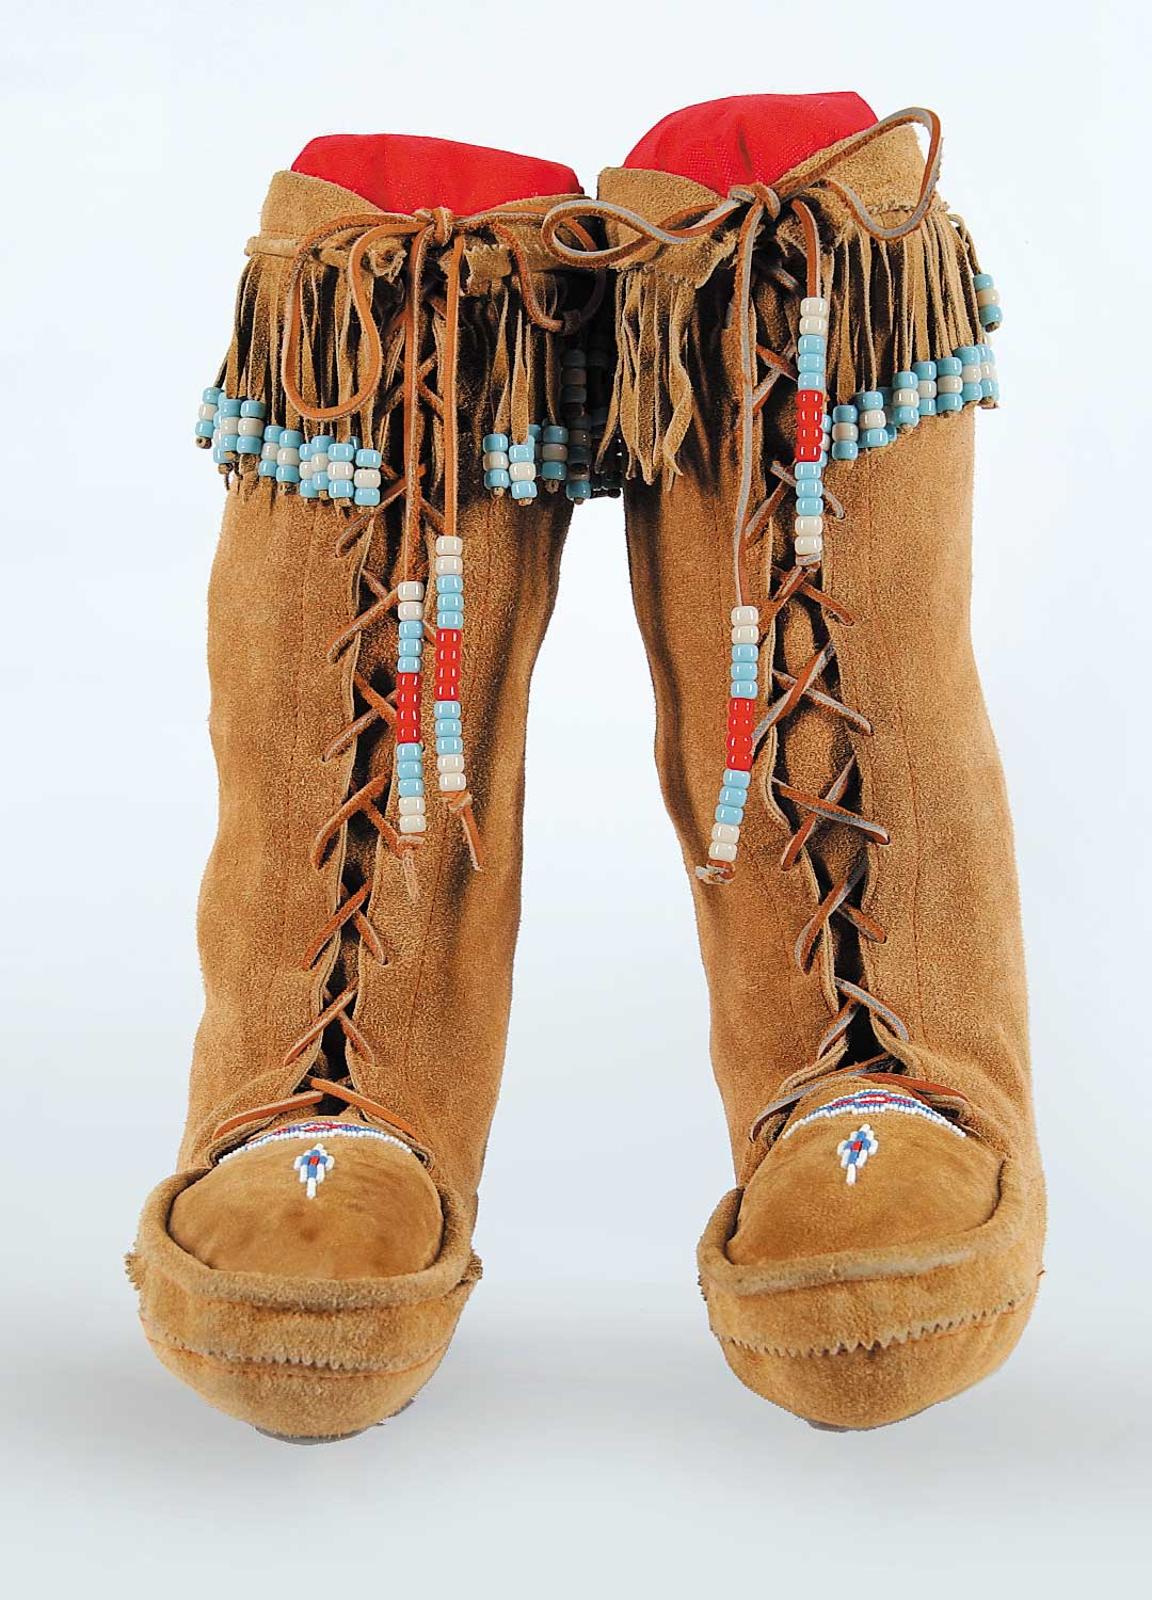 First Nations Basket School - Beaded Leather Mukluks